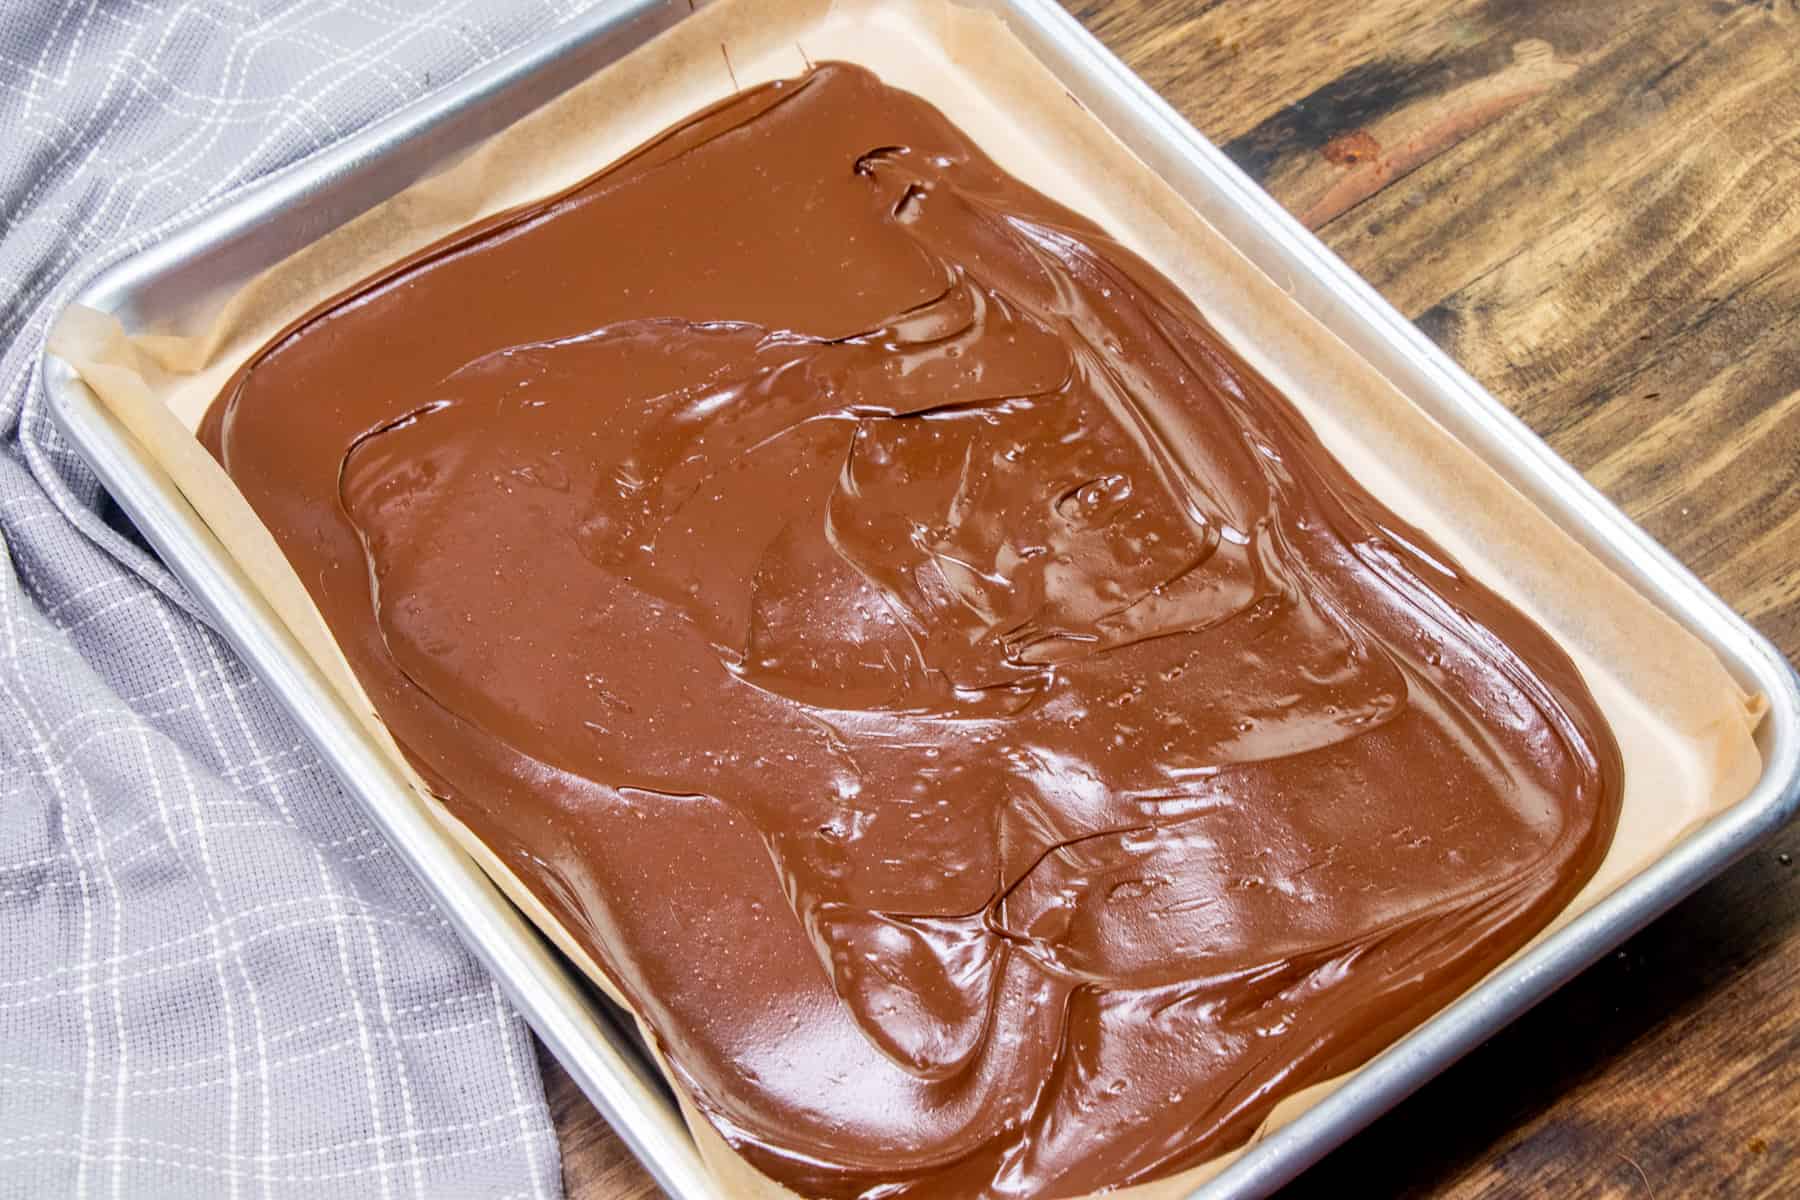 melted chocolate spread out onto parchment paper.